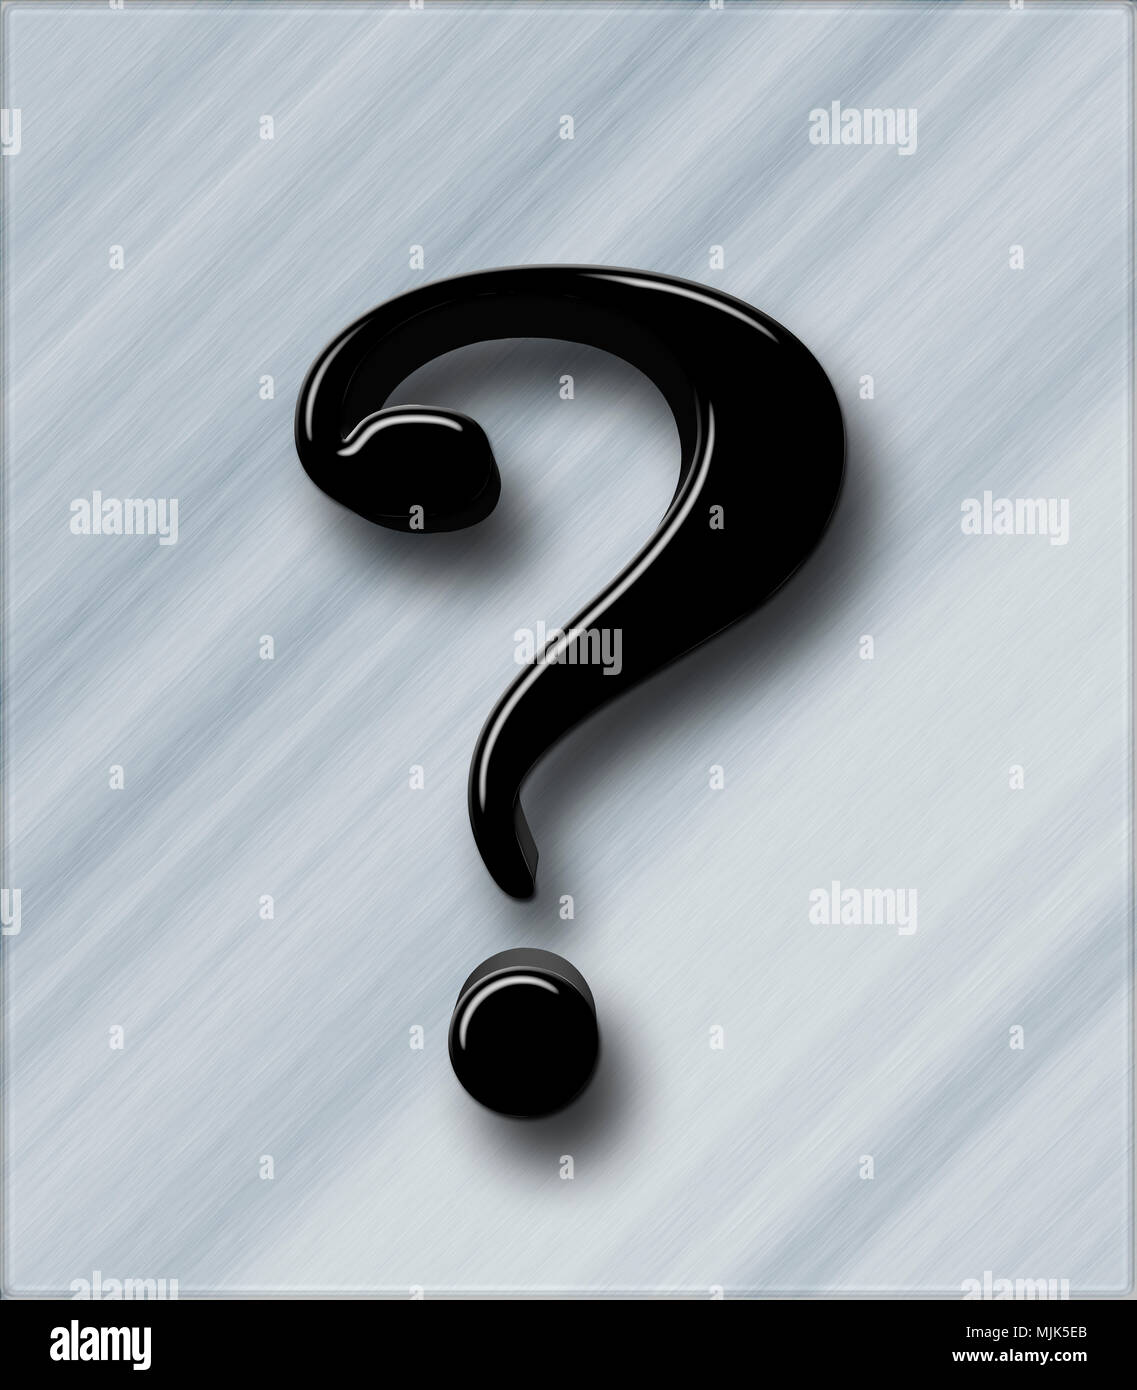 Stock Illustration - Large Three Dimensional Black Question Mark , 3D Illustration, Isolated against the Steel Background. Stock Photo